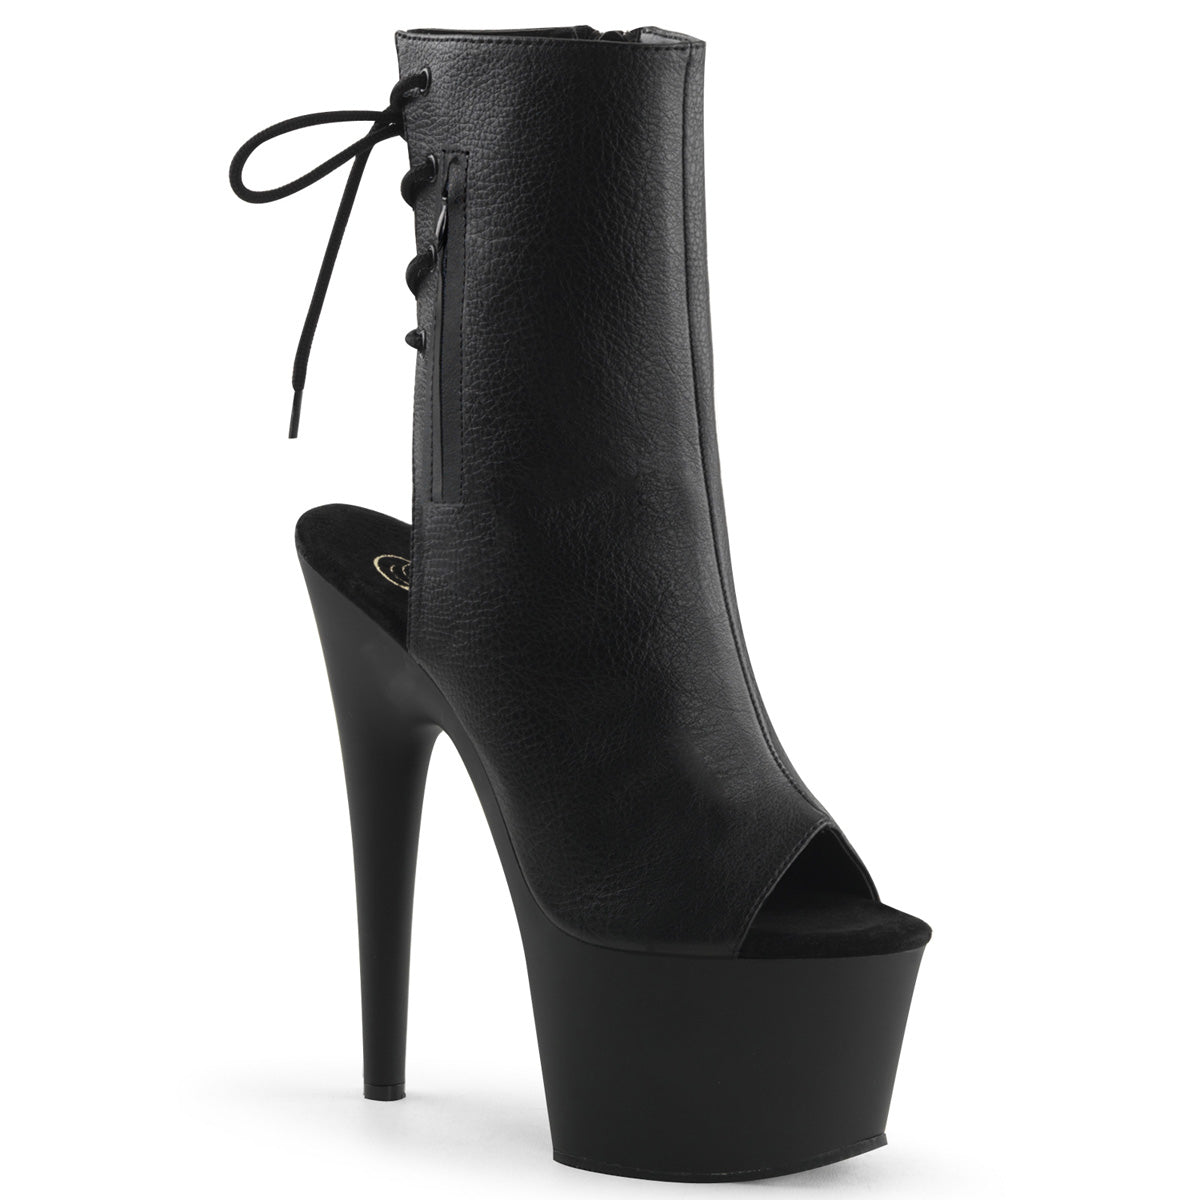 Black 6inch Ankle Boot Heels